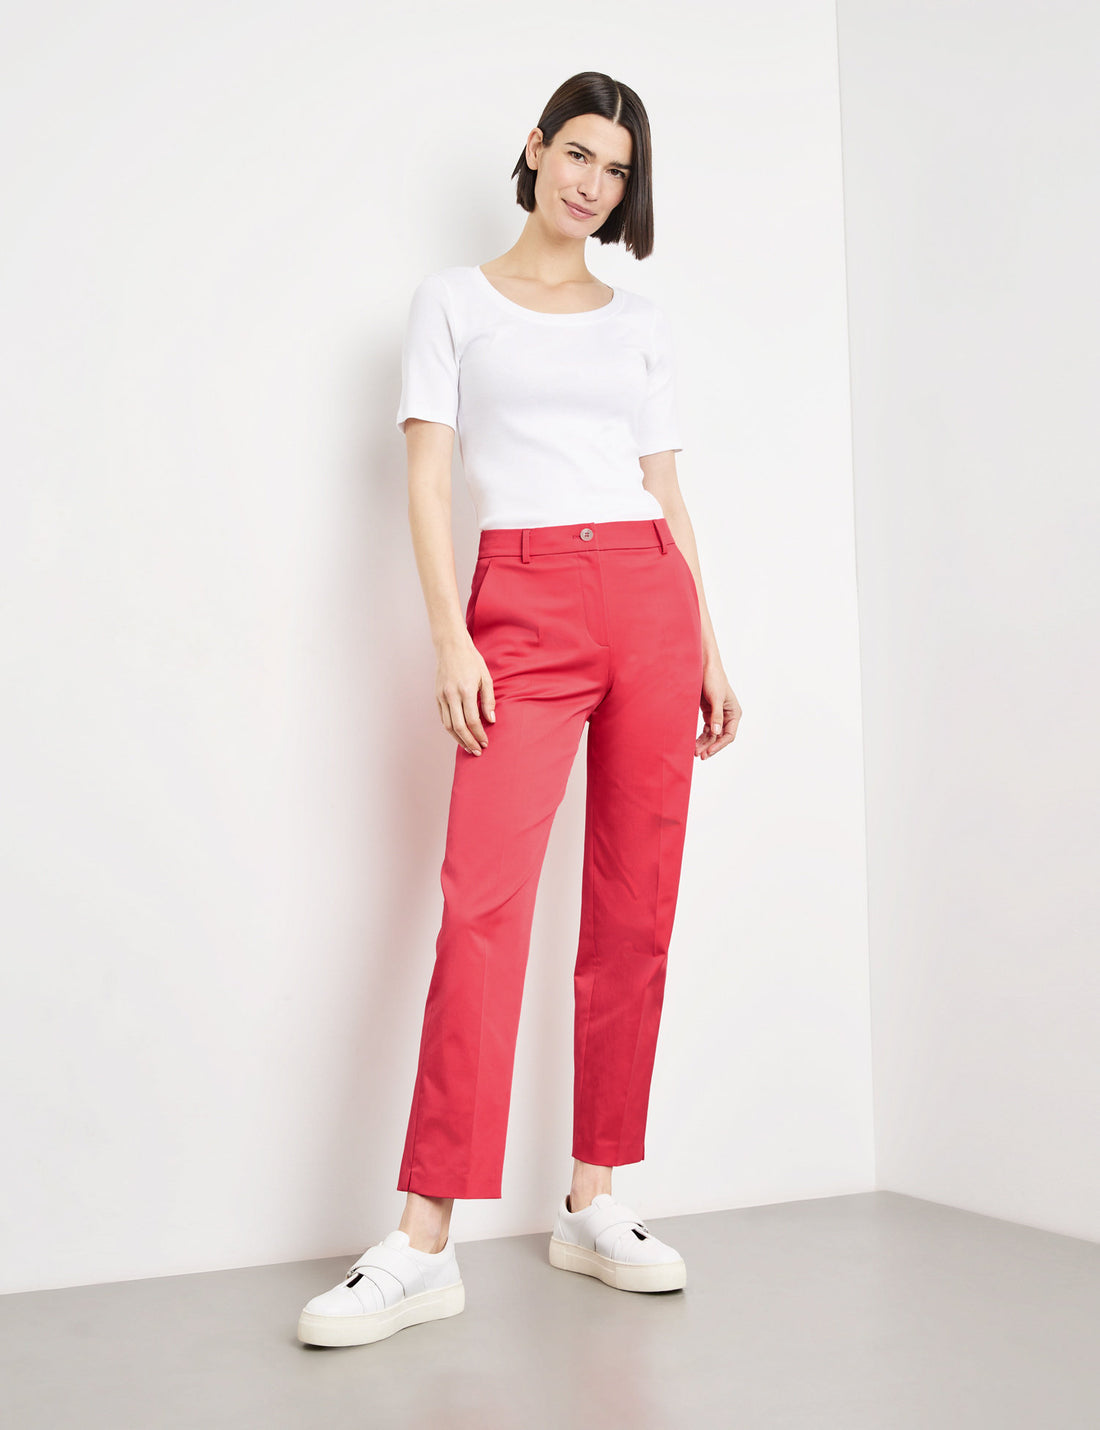 Elegant Trousers With Pressed Pleats_320003-31332_60140_01